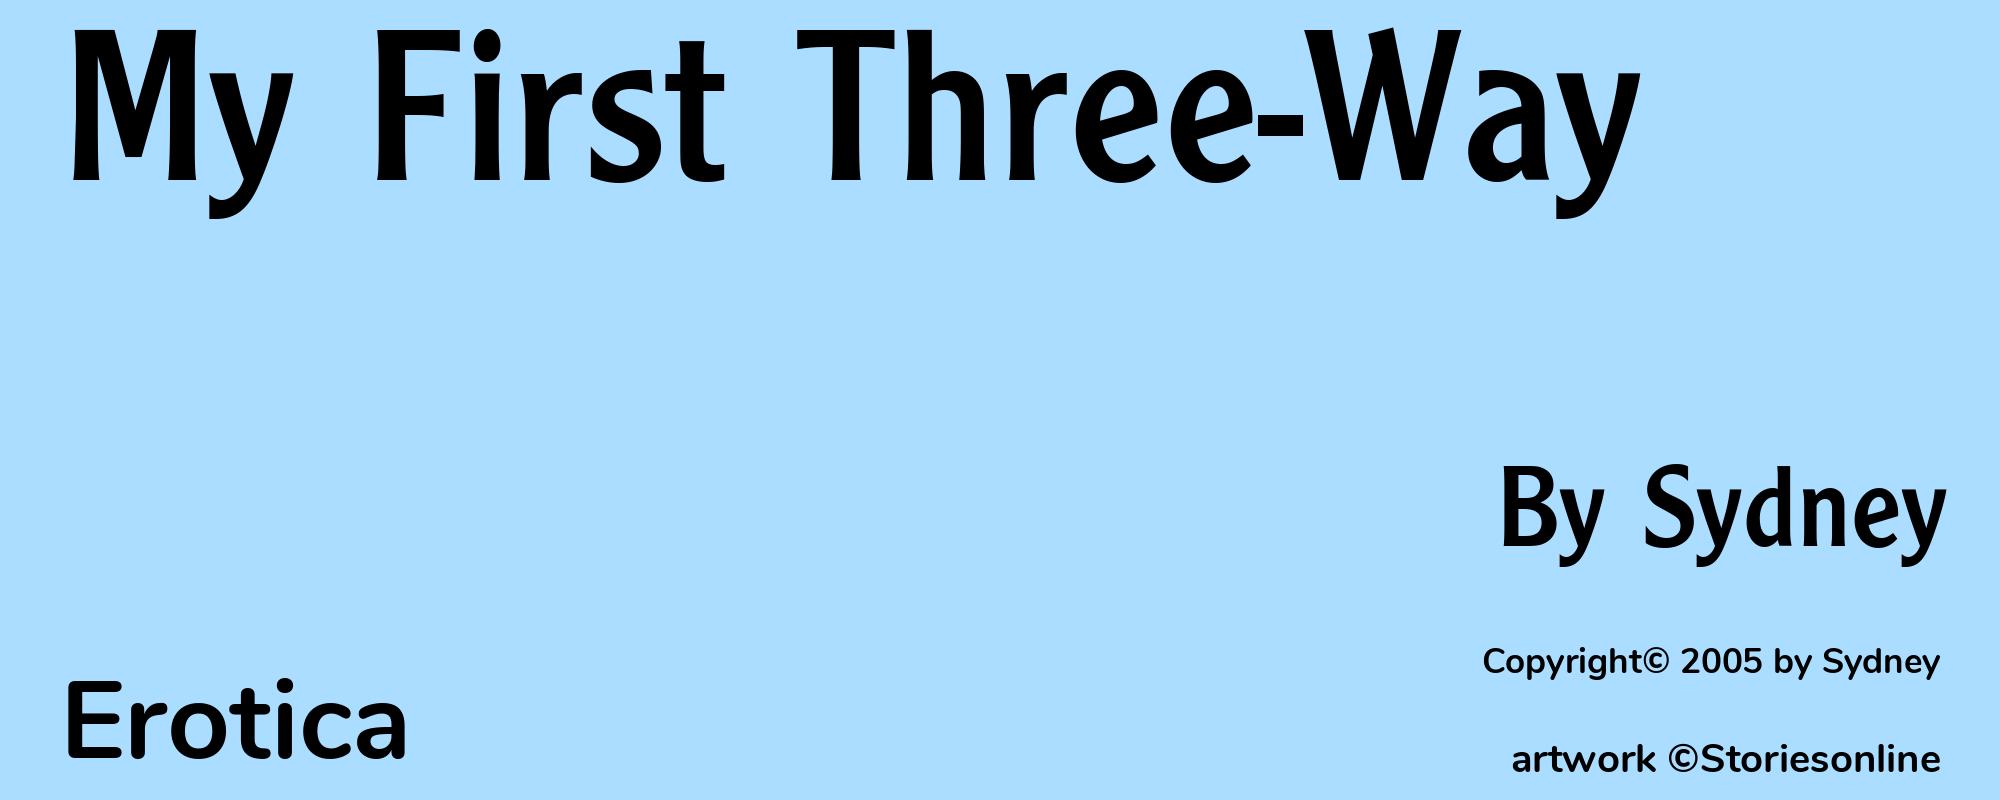 My First Three-Way - Cover